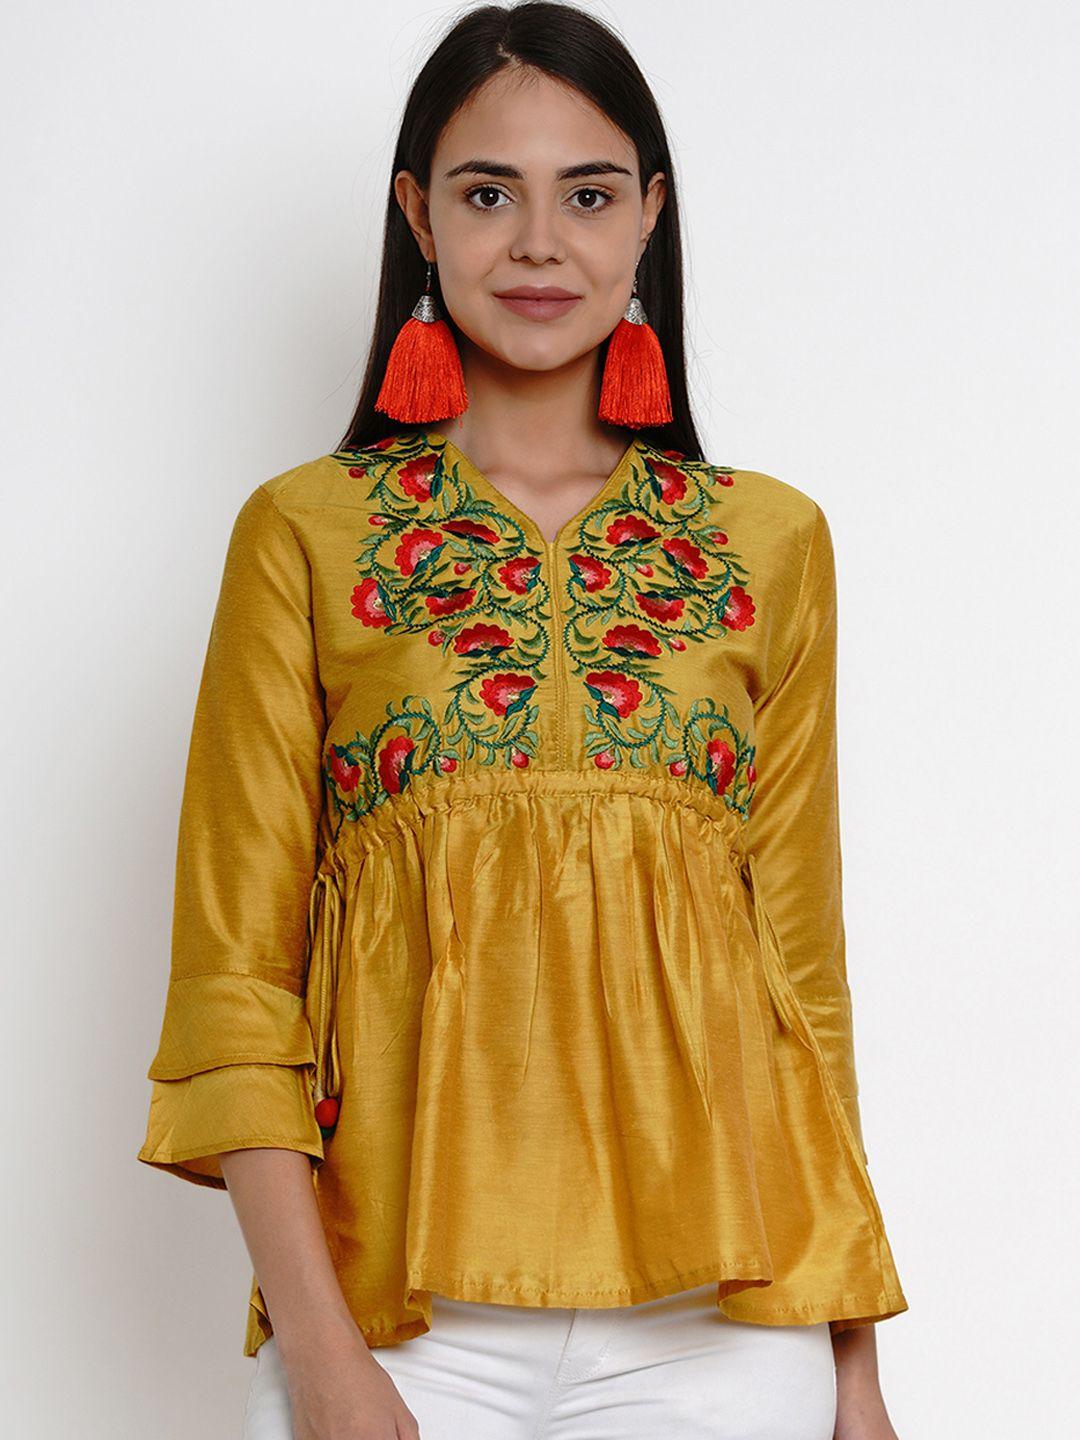 bhama couture women mustard yellow embroidered top